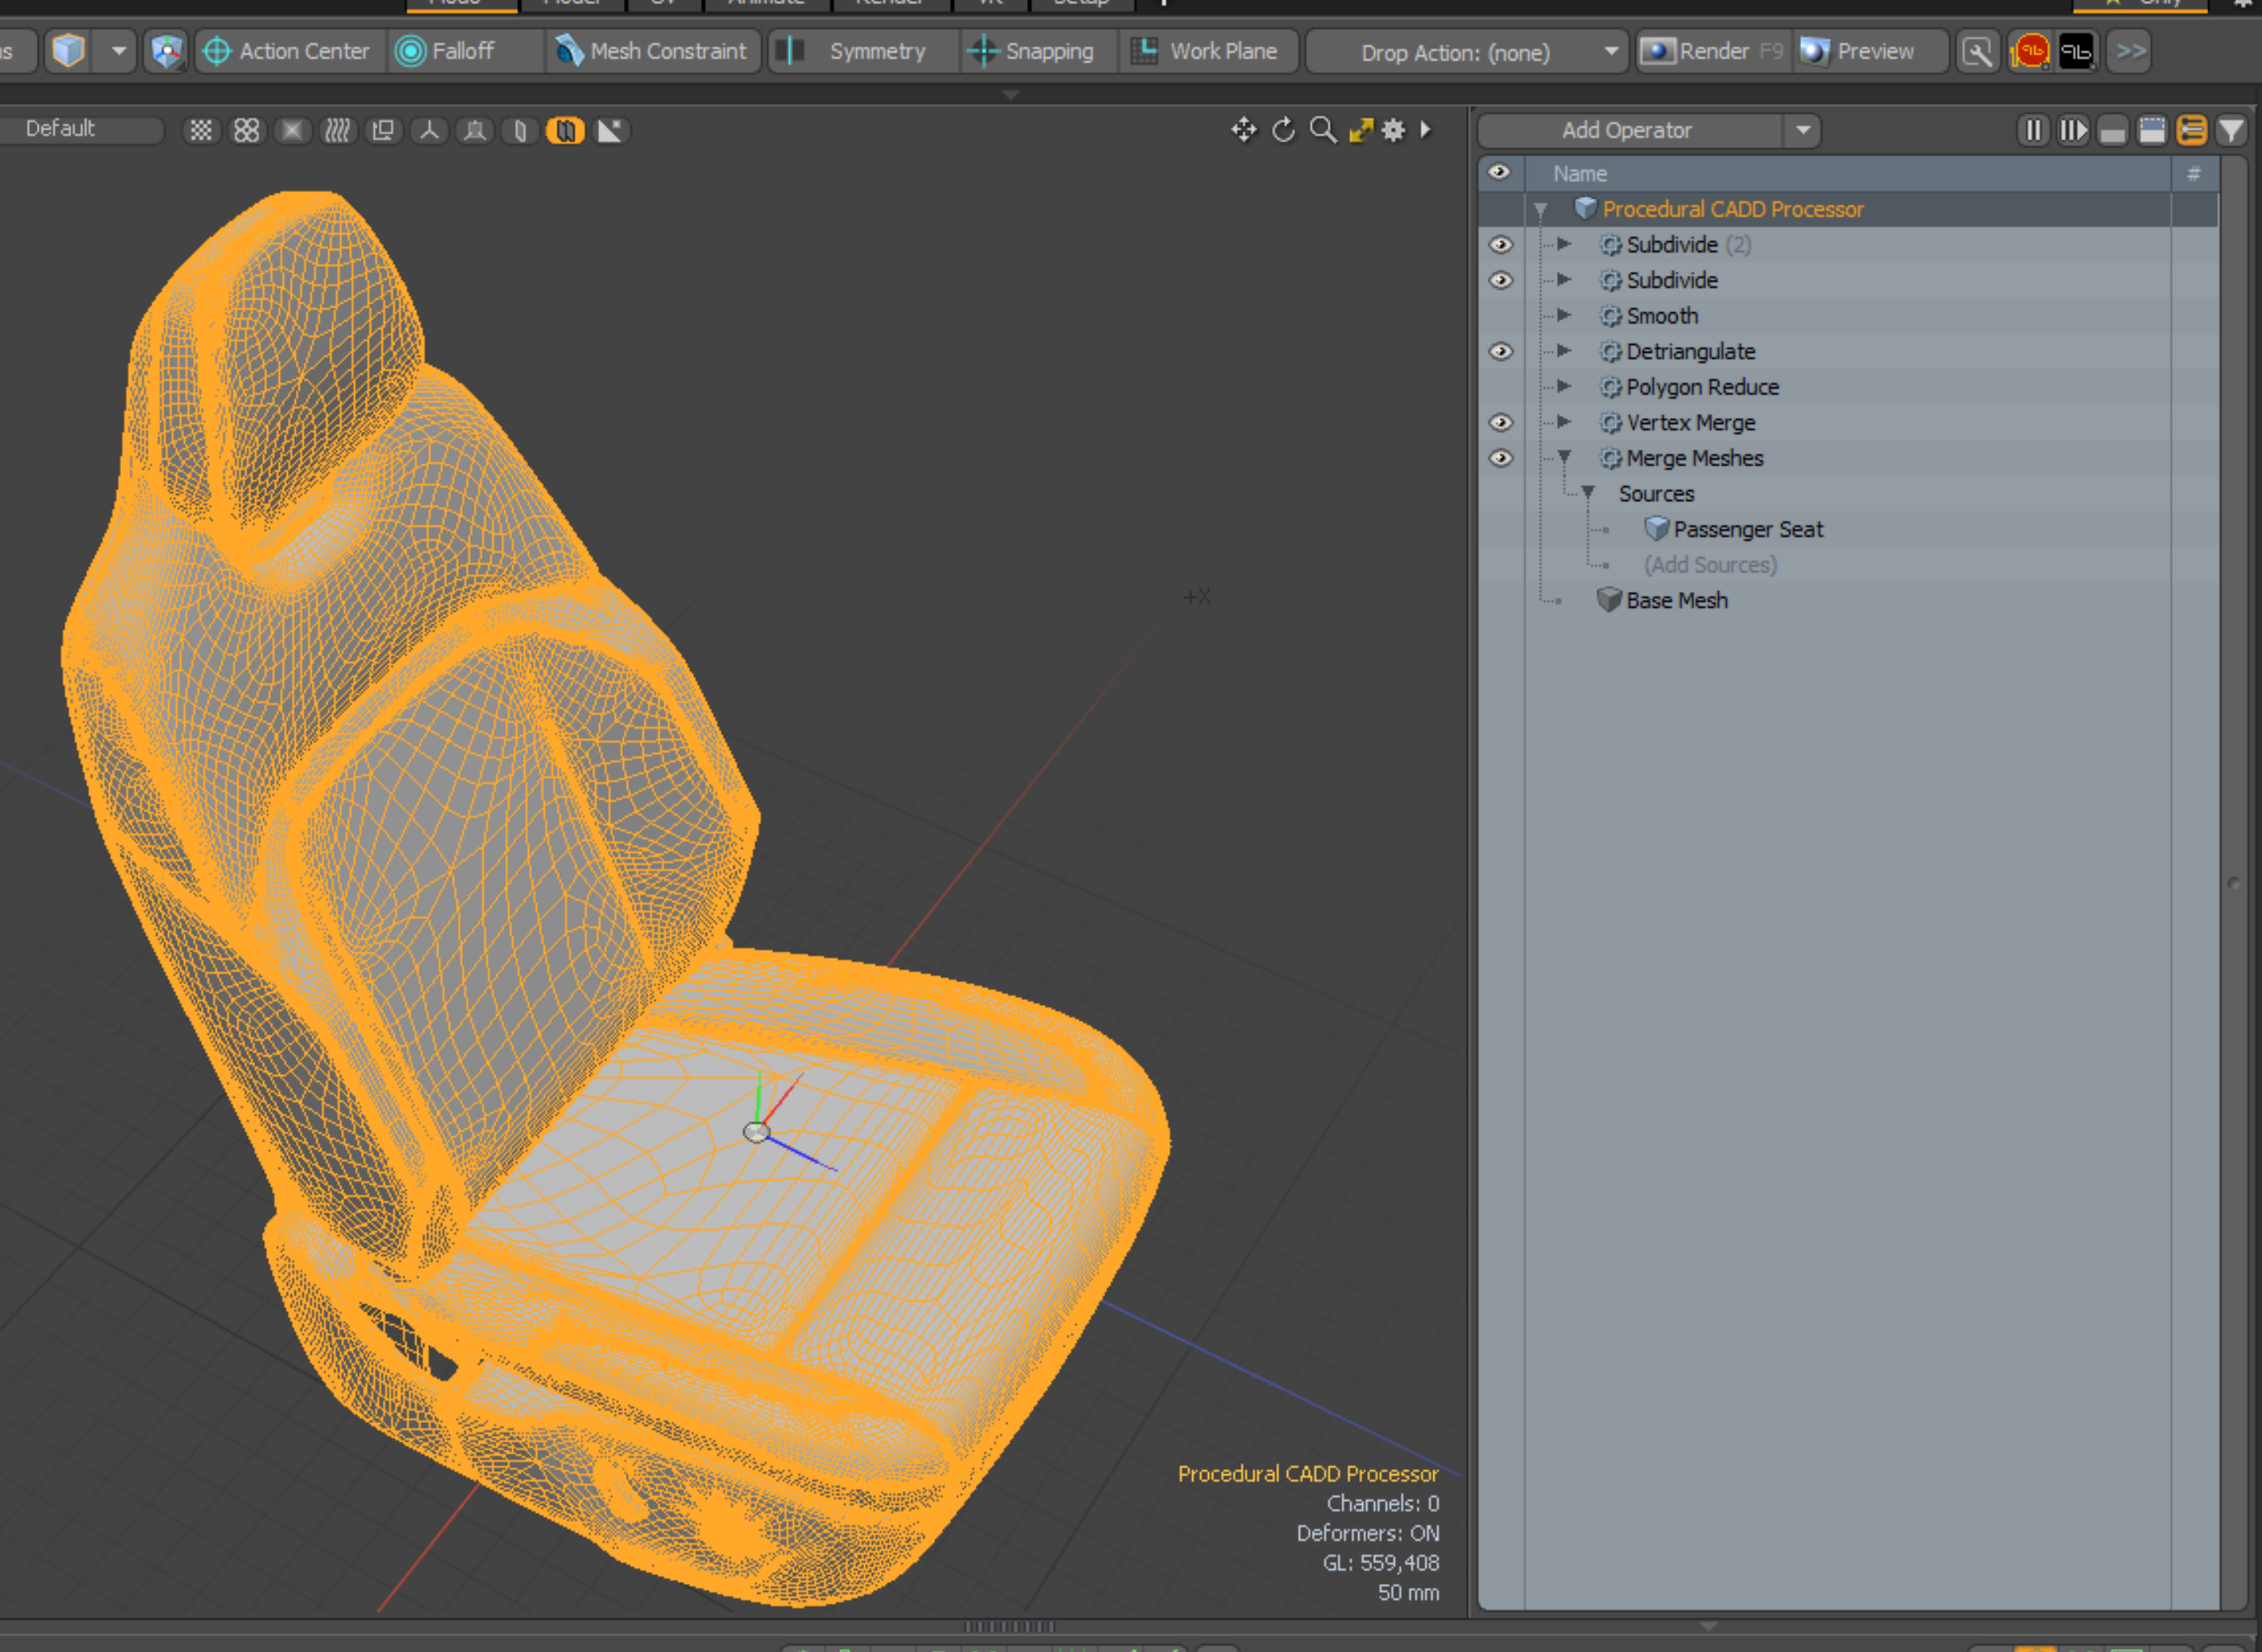 Procedural CADD processor assembly I developed in Modo to handle incoming CADD meshes in Modo.